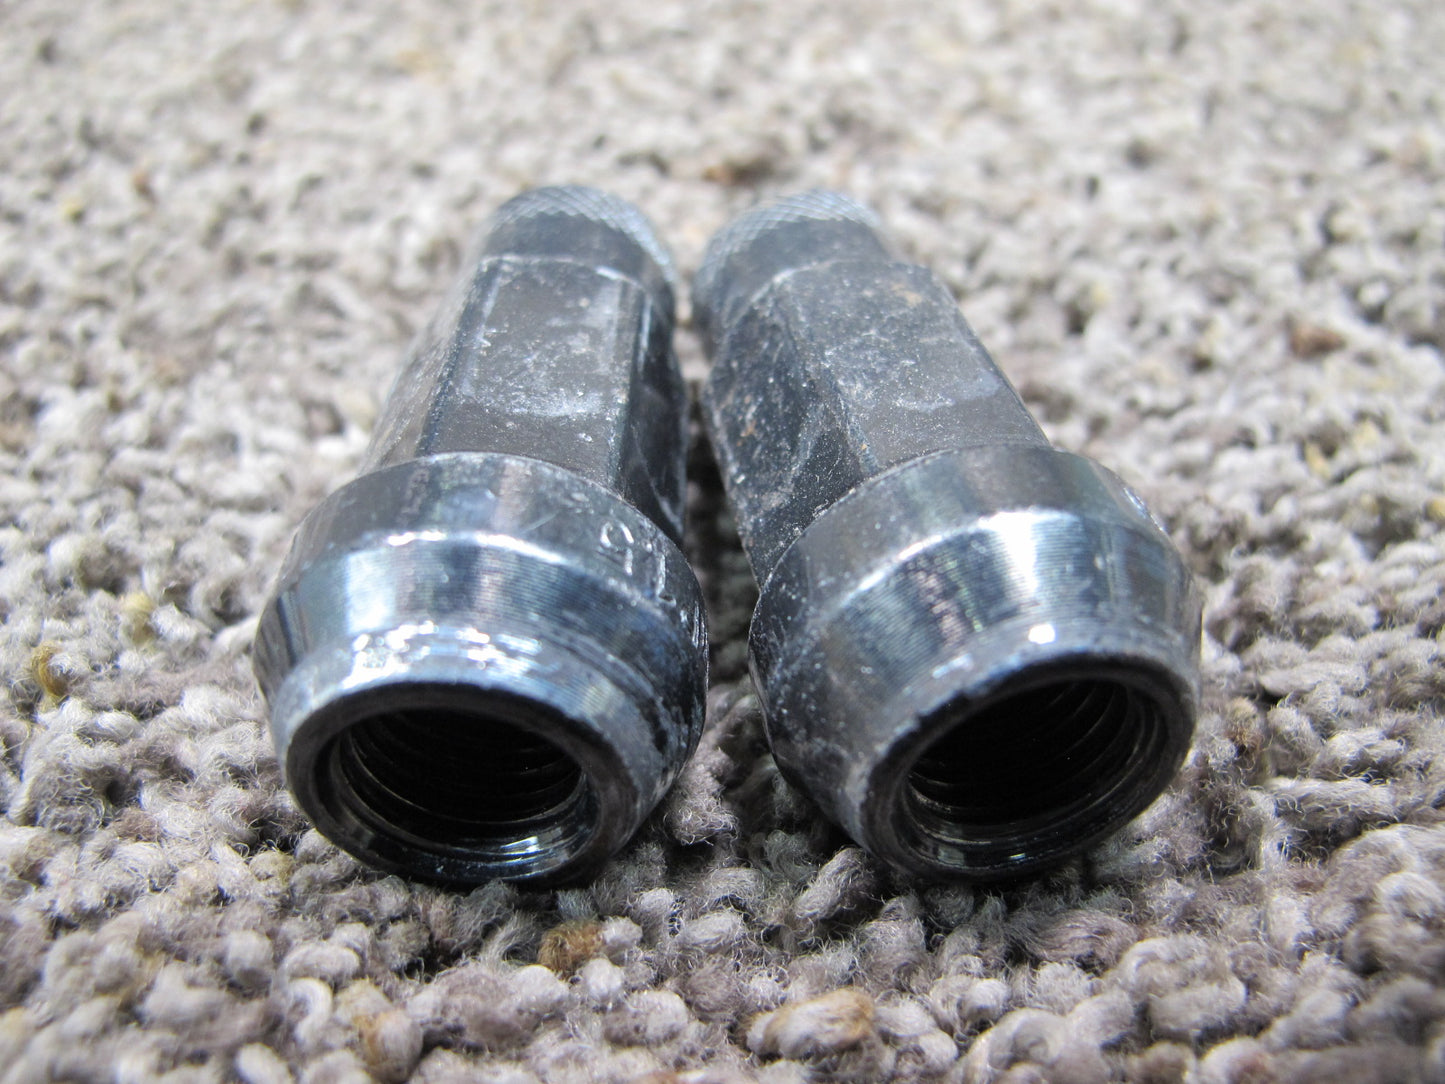 16 Extended Open End Lug Nuts